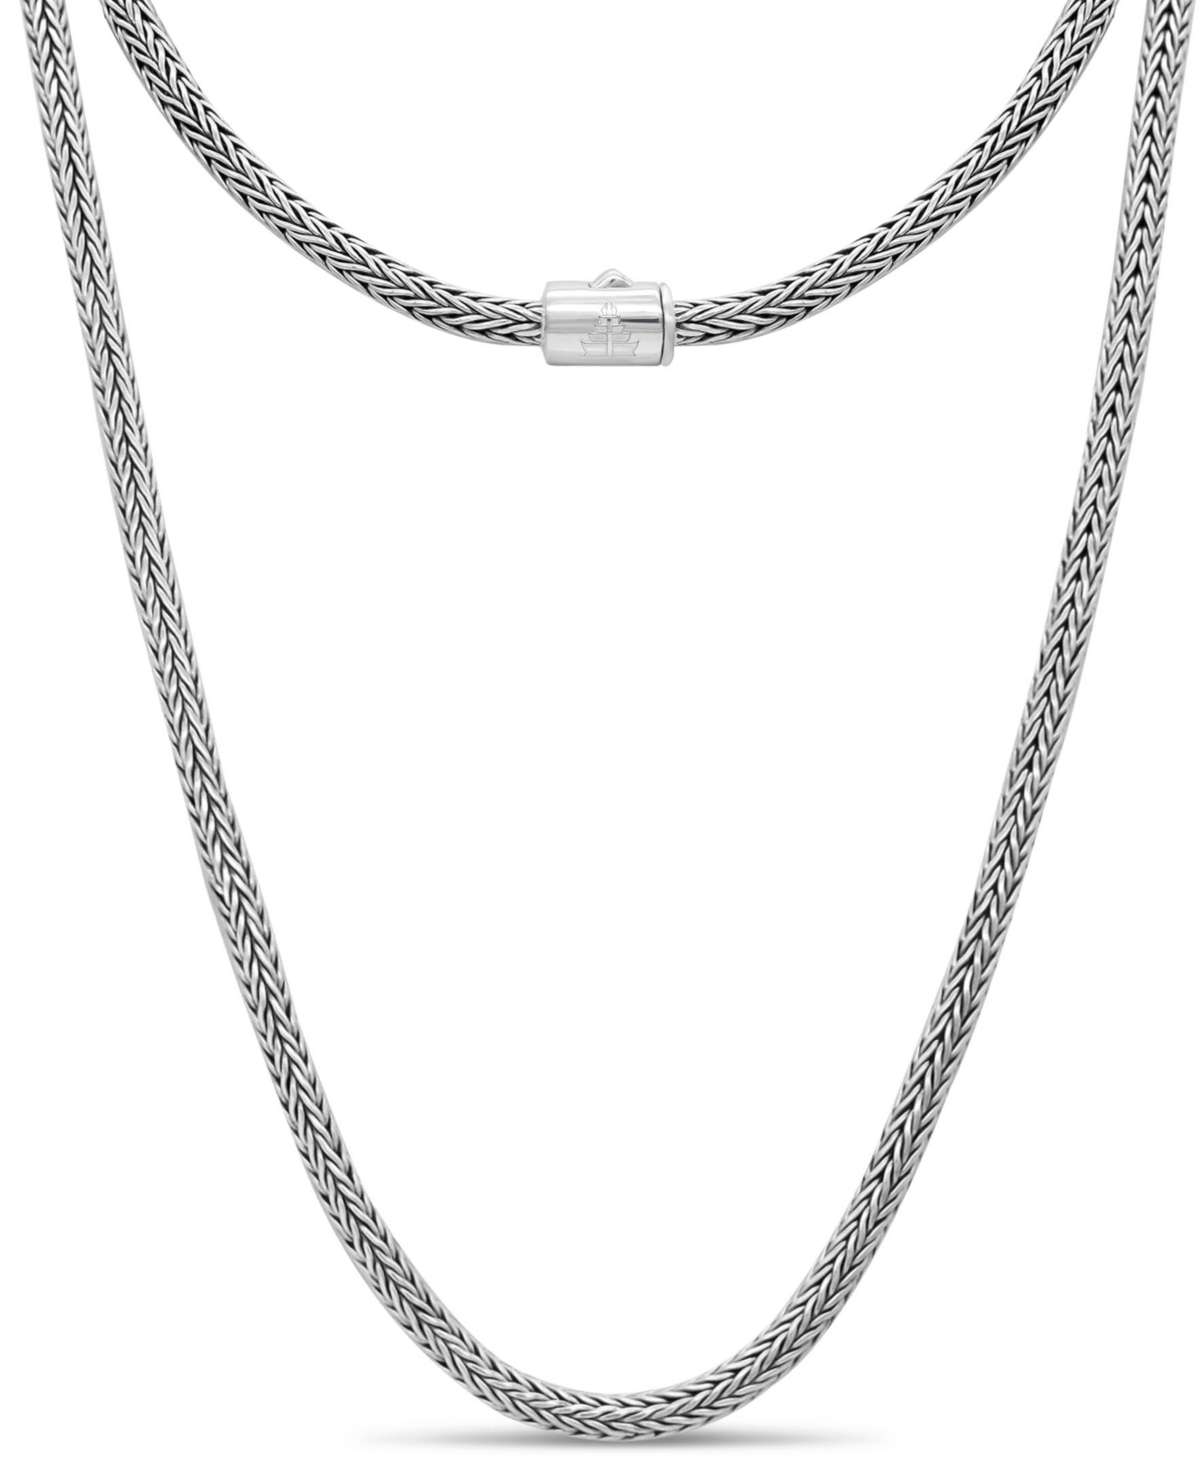 Foxtail Round 4mm Chain Necklace in Sterling Silver - Silver